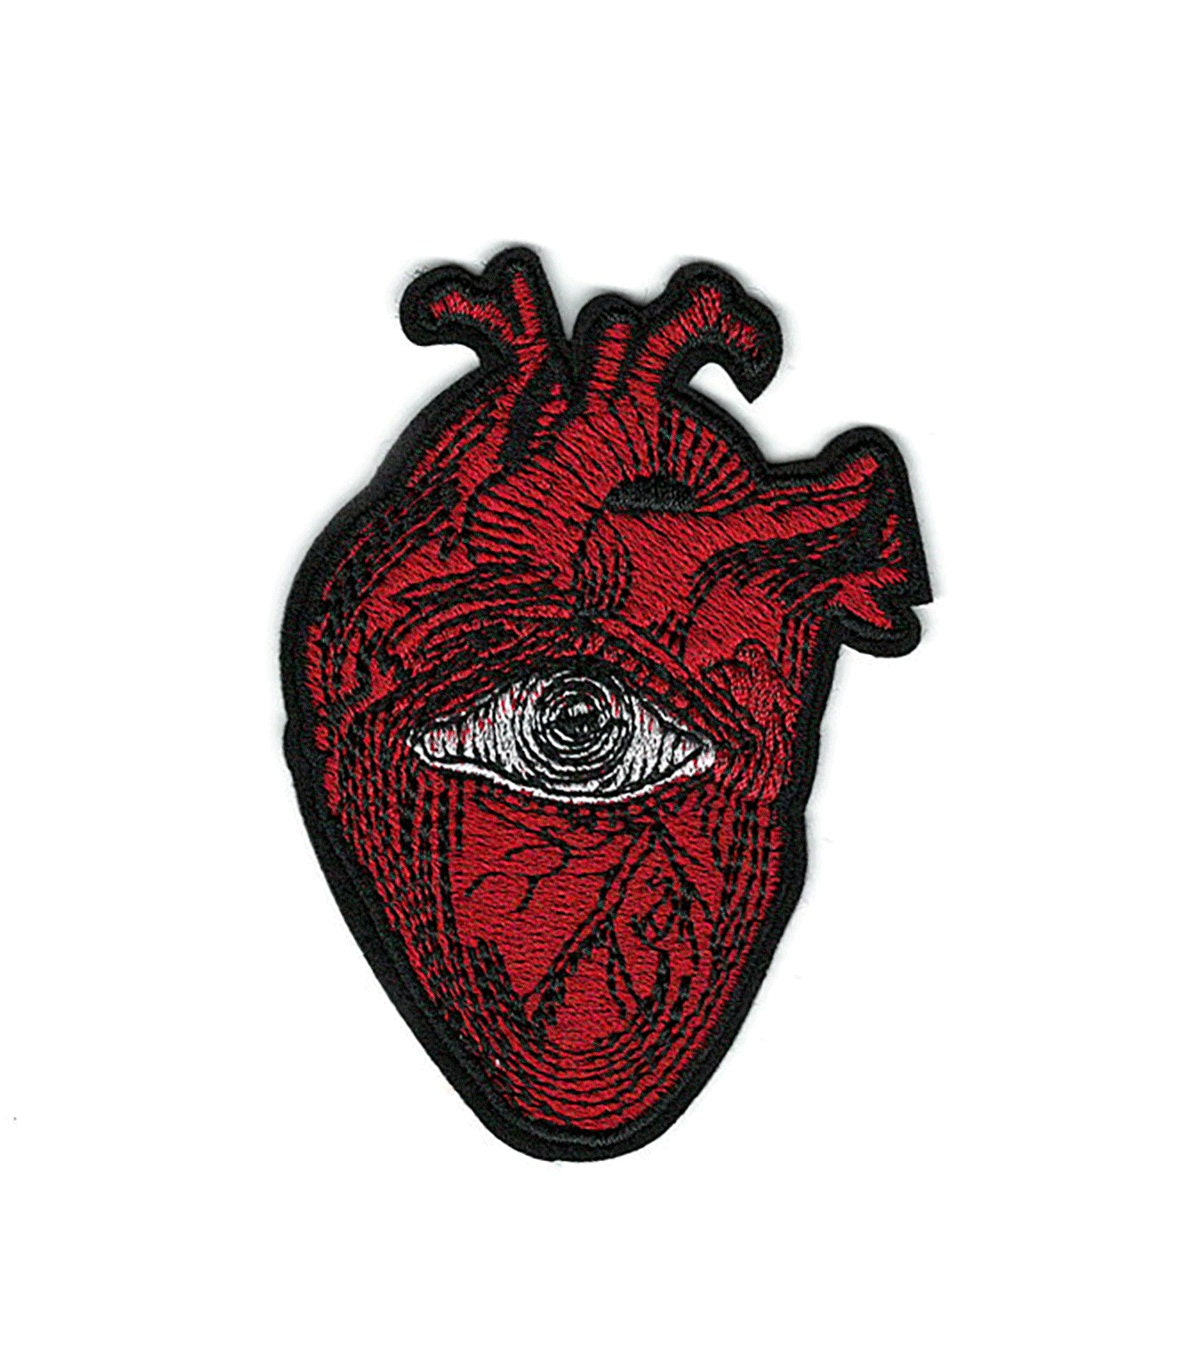 Red Heart Patch Outline 3 1/4 high